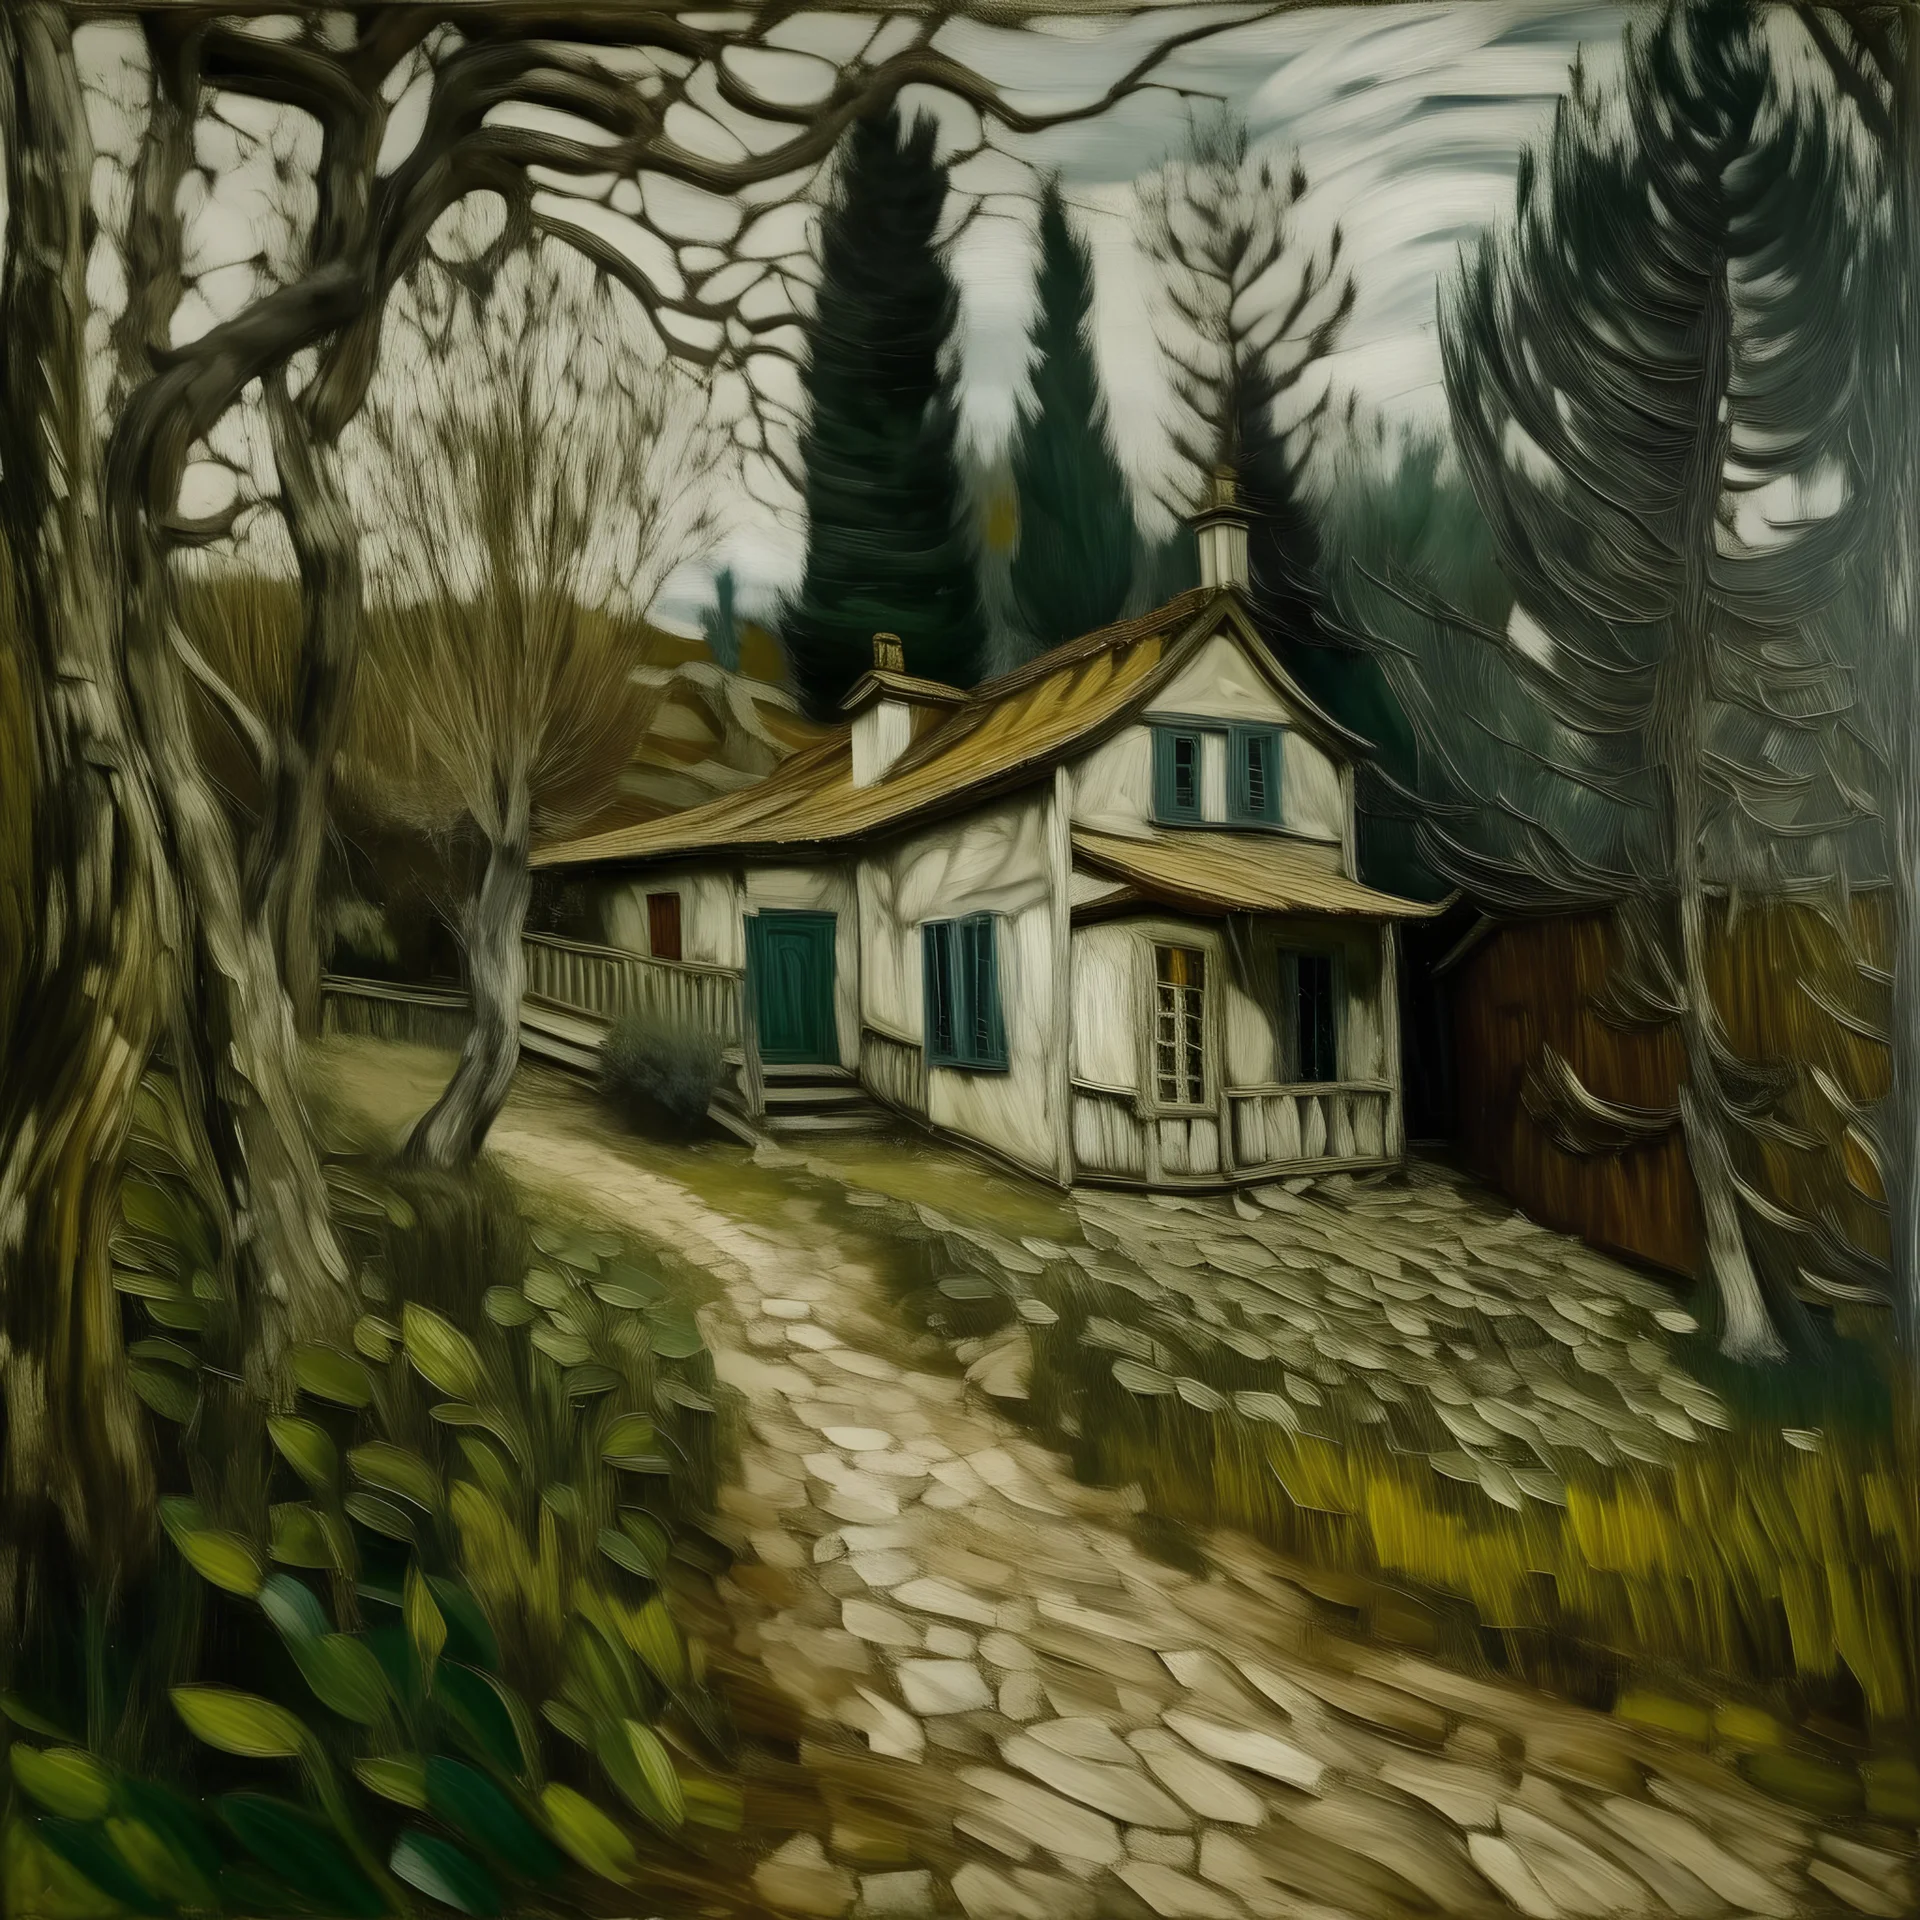 A silver house in the woods painted by Vincent van Gogh